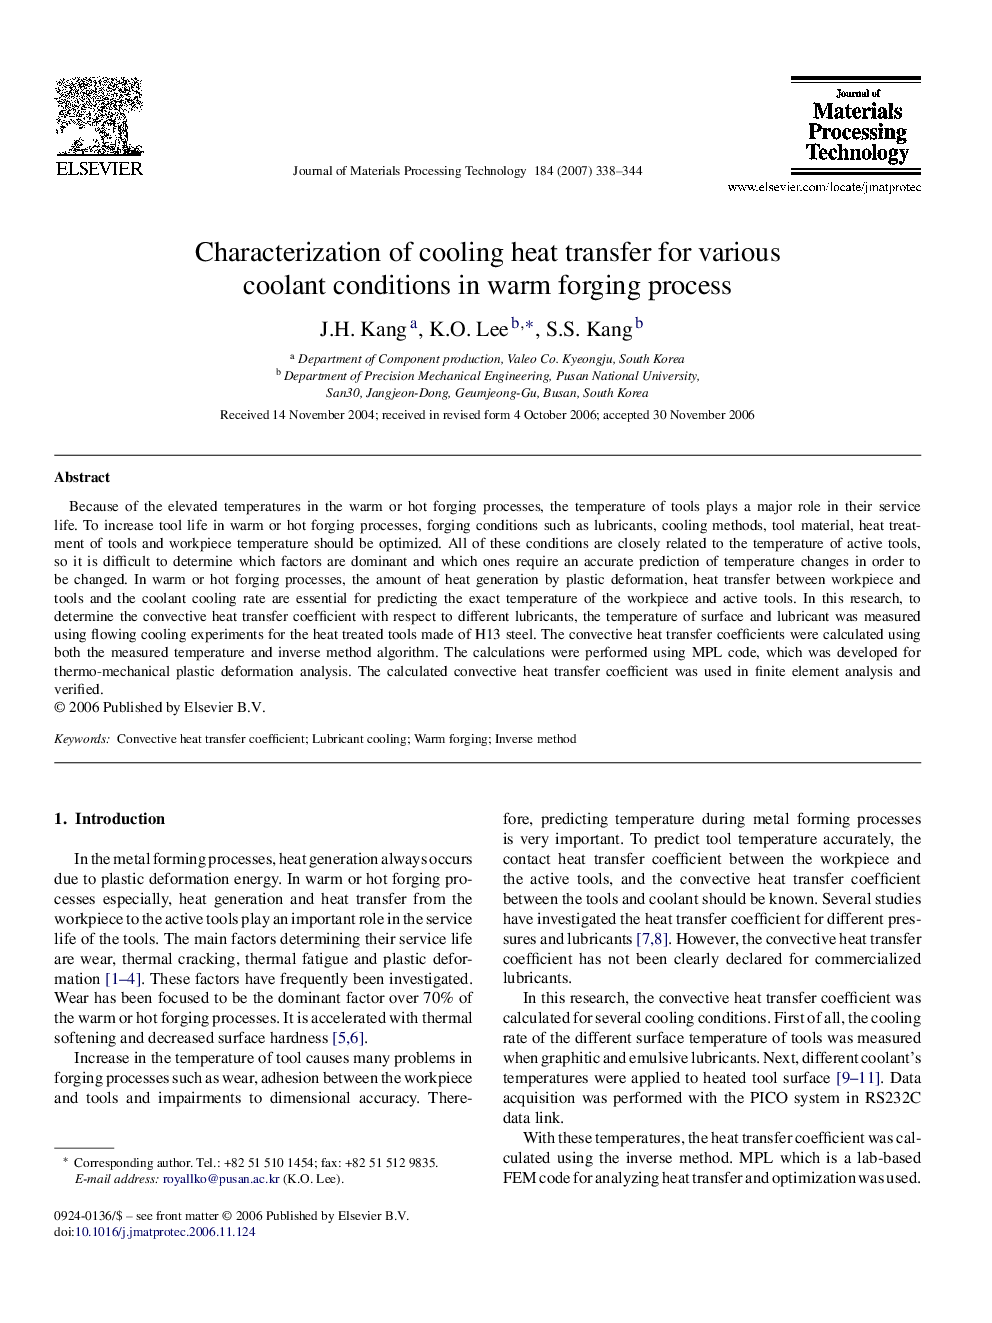 Characterization of cooling heat transfer for various coolant conditions in warm forging process